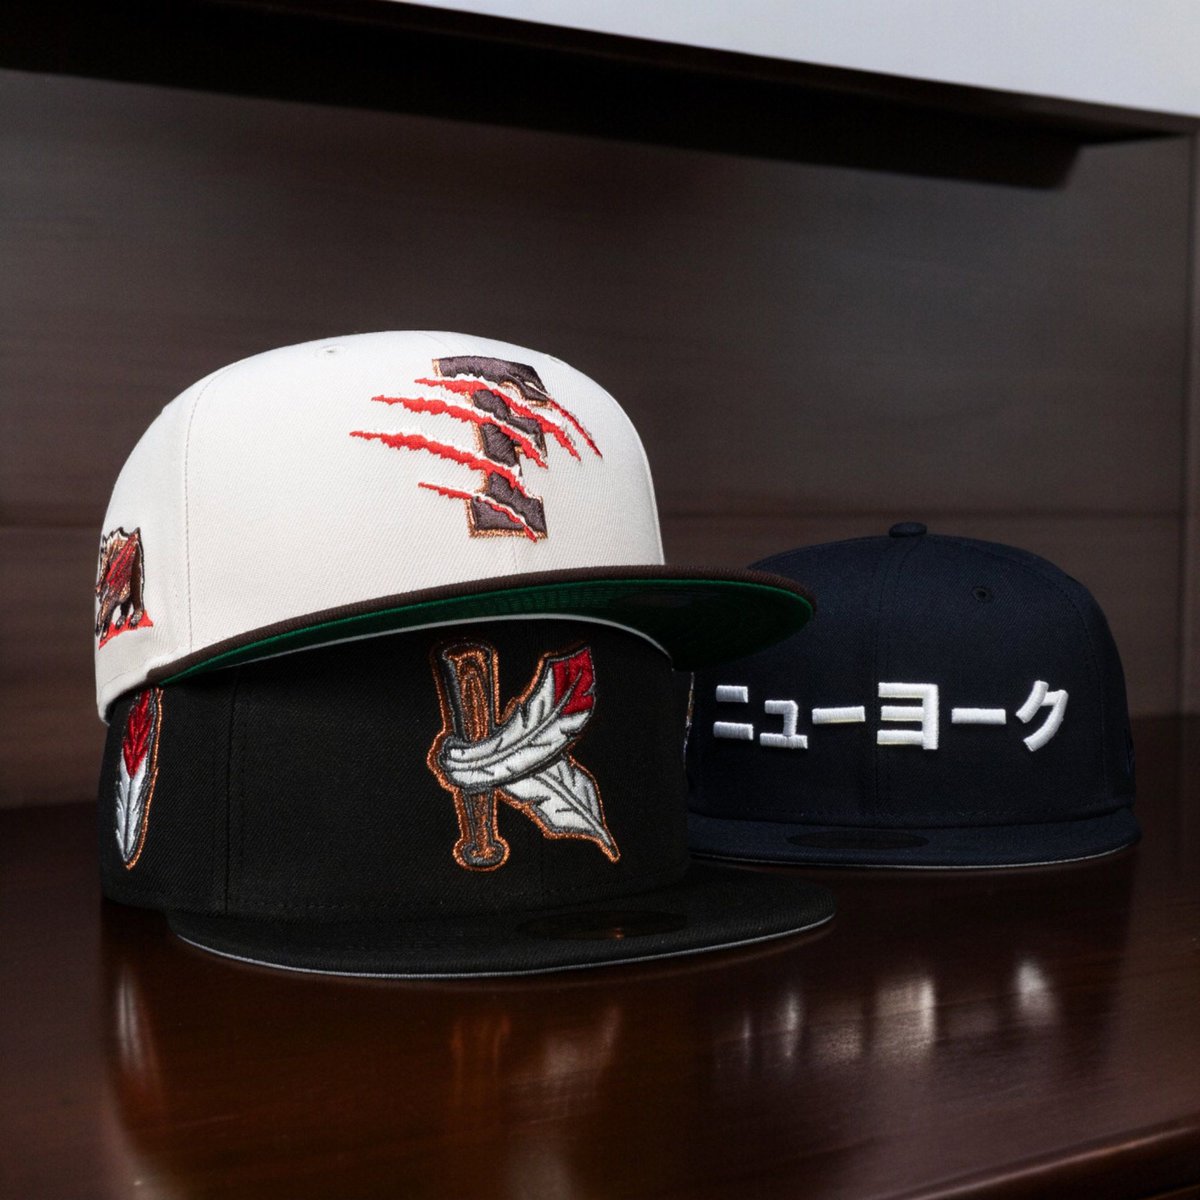 🎂 HAPPY 59FIFTY DAY! 🧢
We celebrate the 70th anniversary of our favorite silhouette with 3 amazing hats! 🤯
🆕 NEW ERA 59FIFTY!
🕗 DROPPING TODAY at 19:00 CET 
SHOP 👉 LINK IN BIO 🚨 FIRST COME - FIRST SERVE!

#milb #kinston #yankees #fresno #fashion #caps